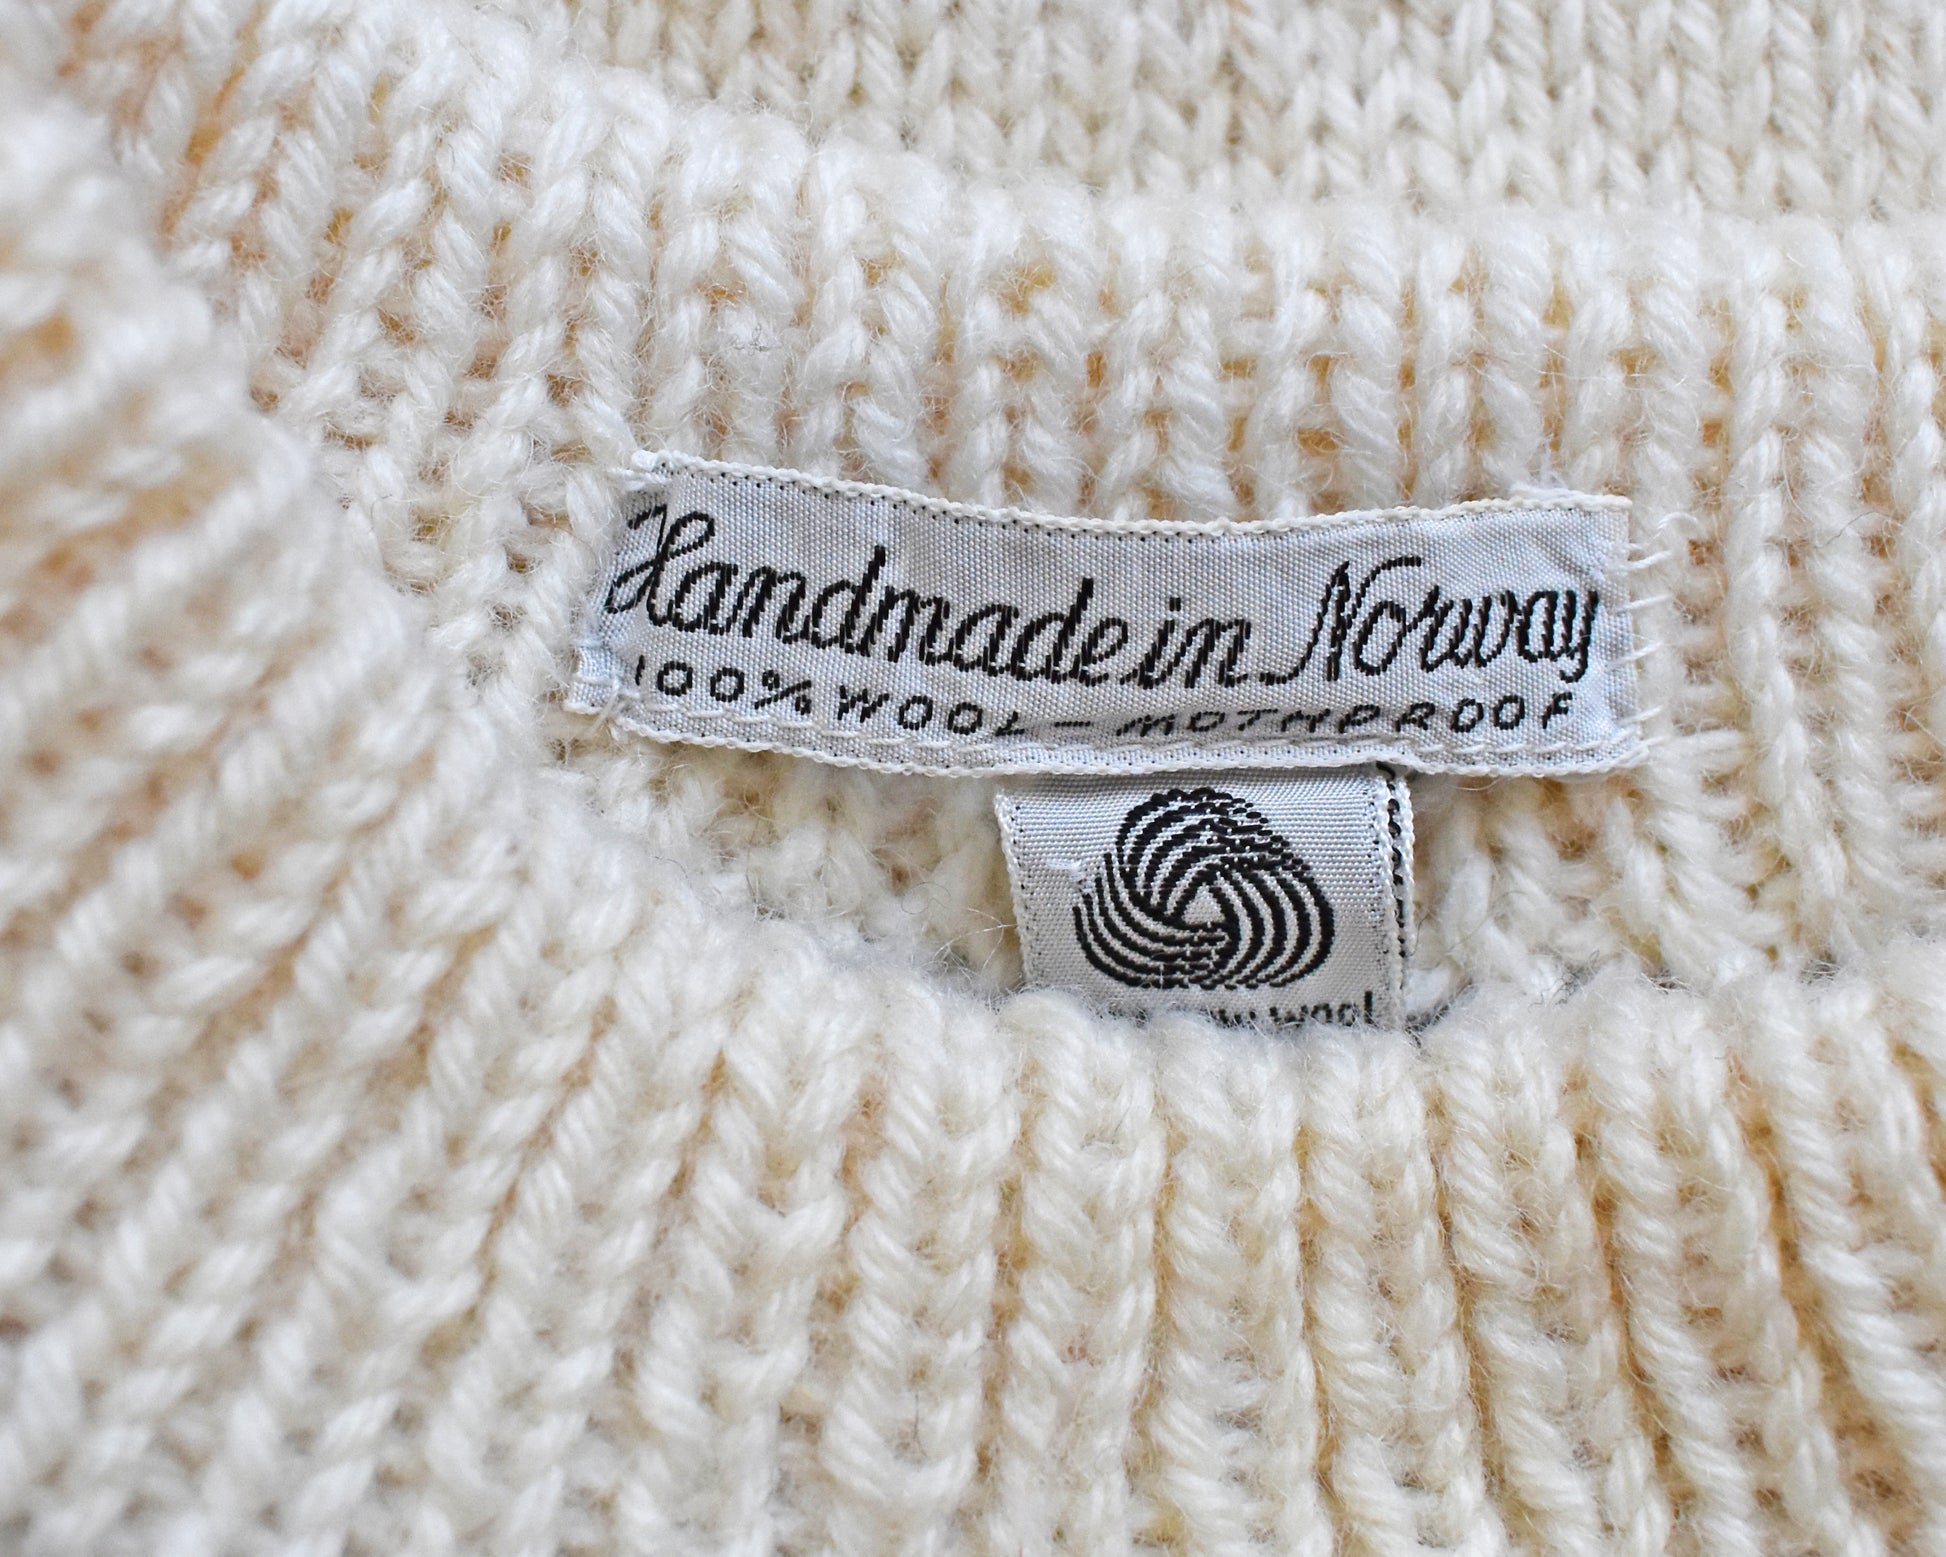 Close up of the tag which says "Handmade in Norway, 100% Wool - Mothproof"